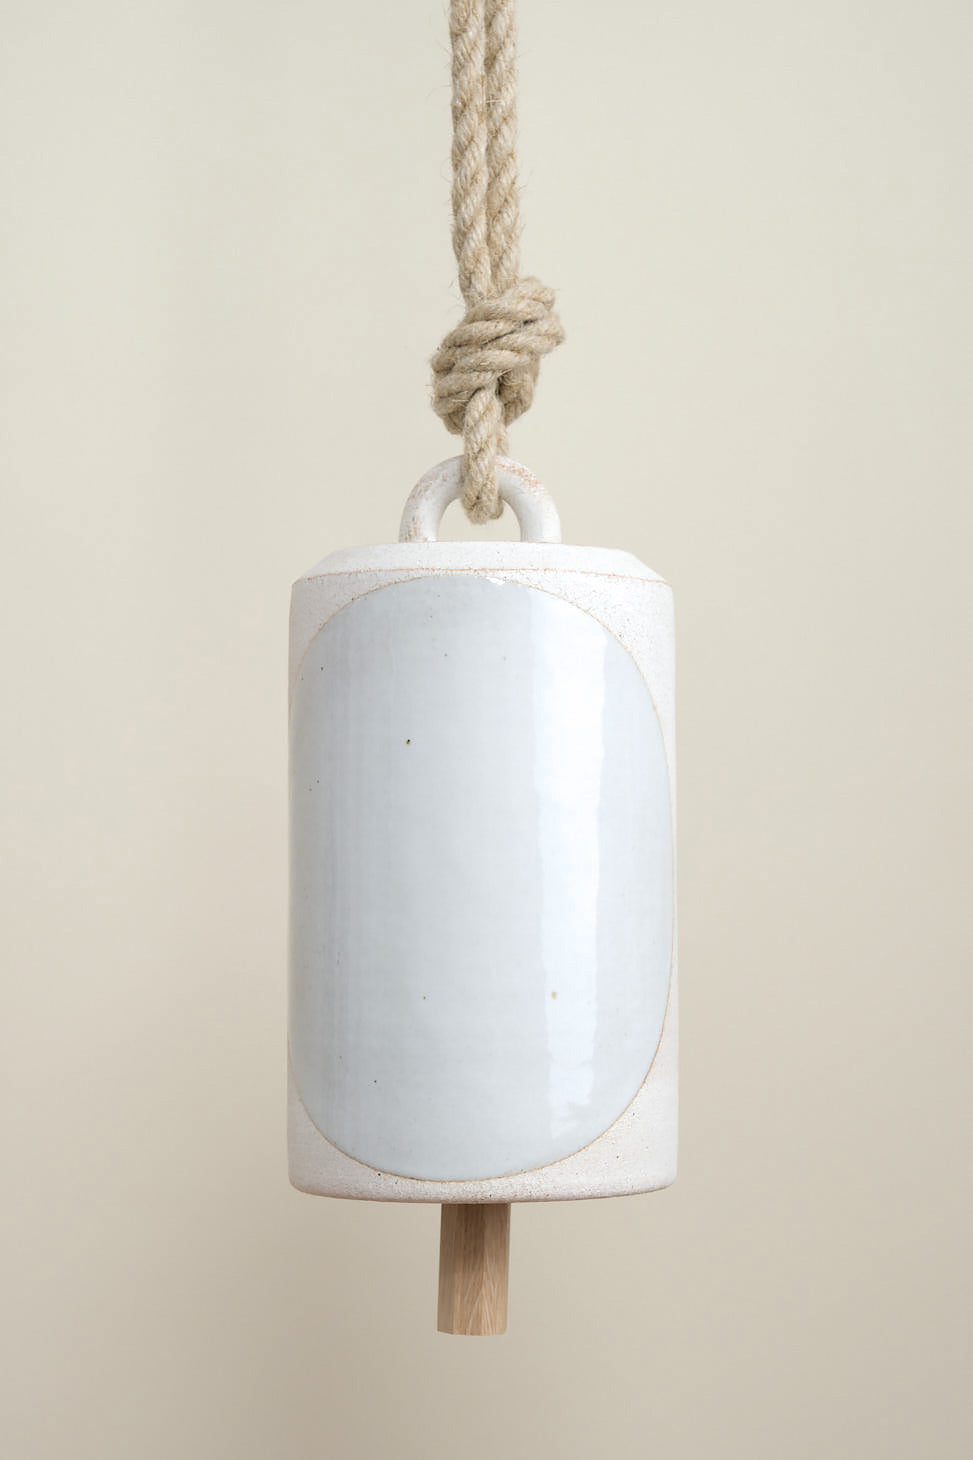 Large Tall Thrown Bell in New Moon White on rope